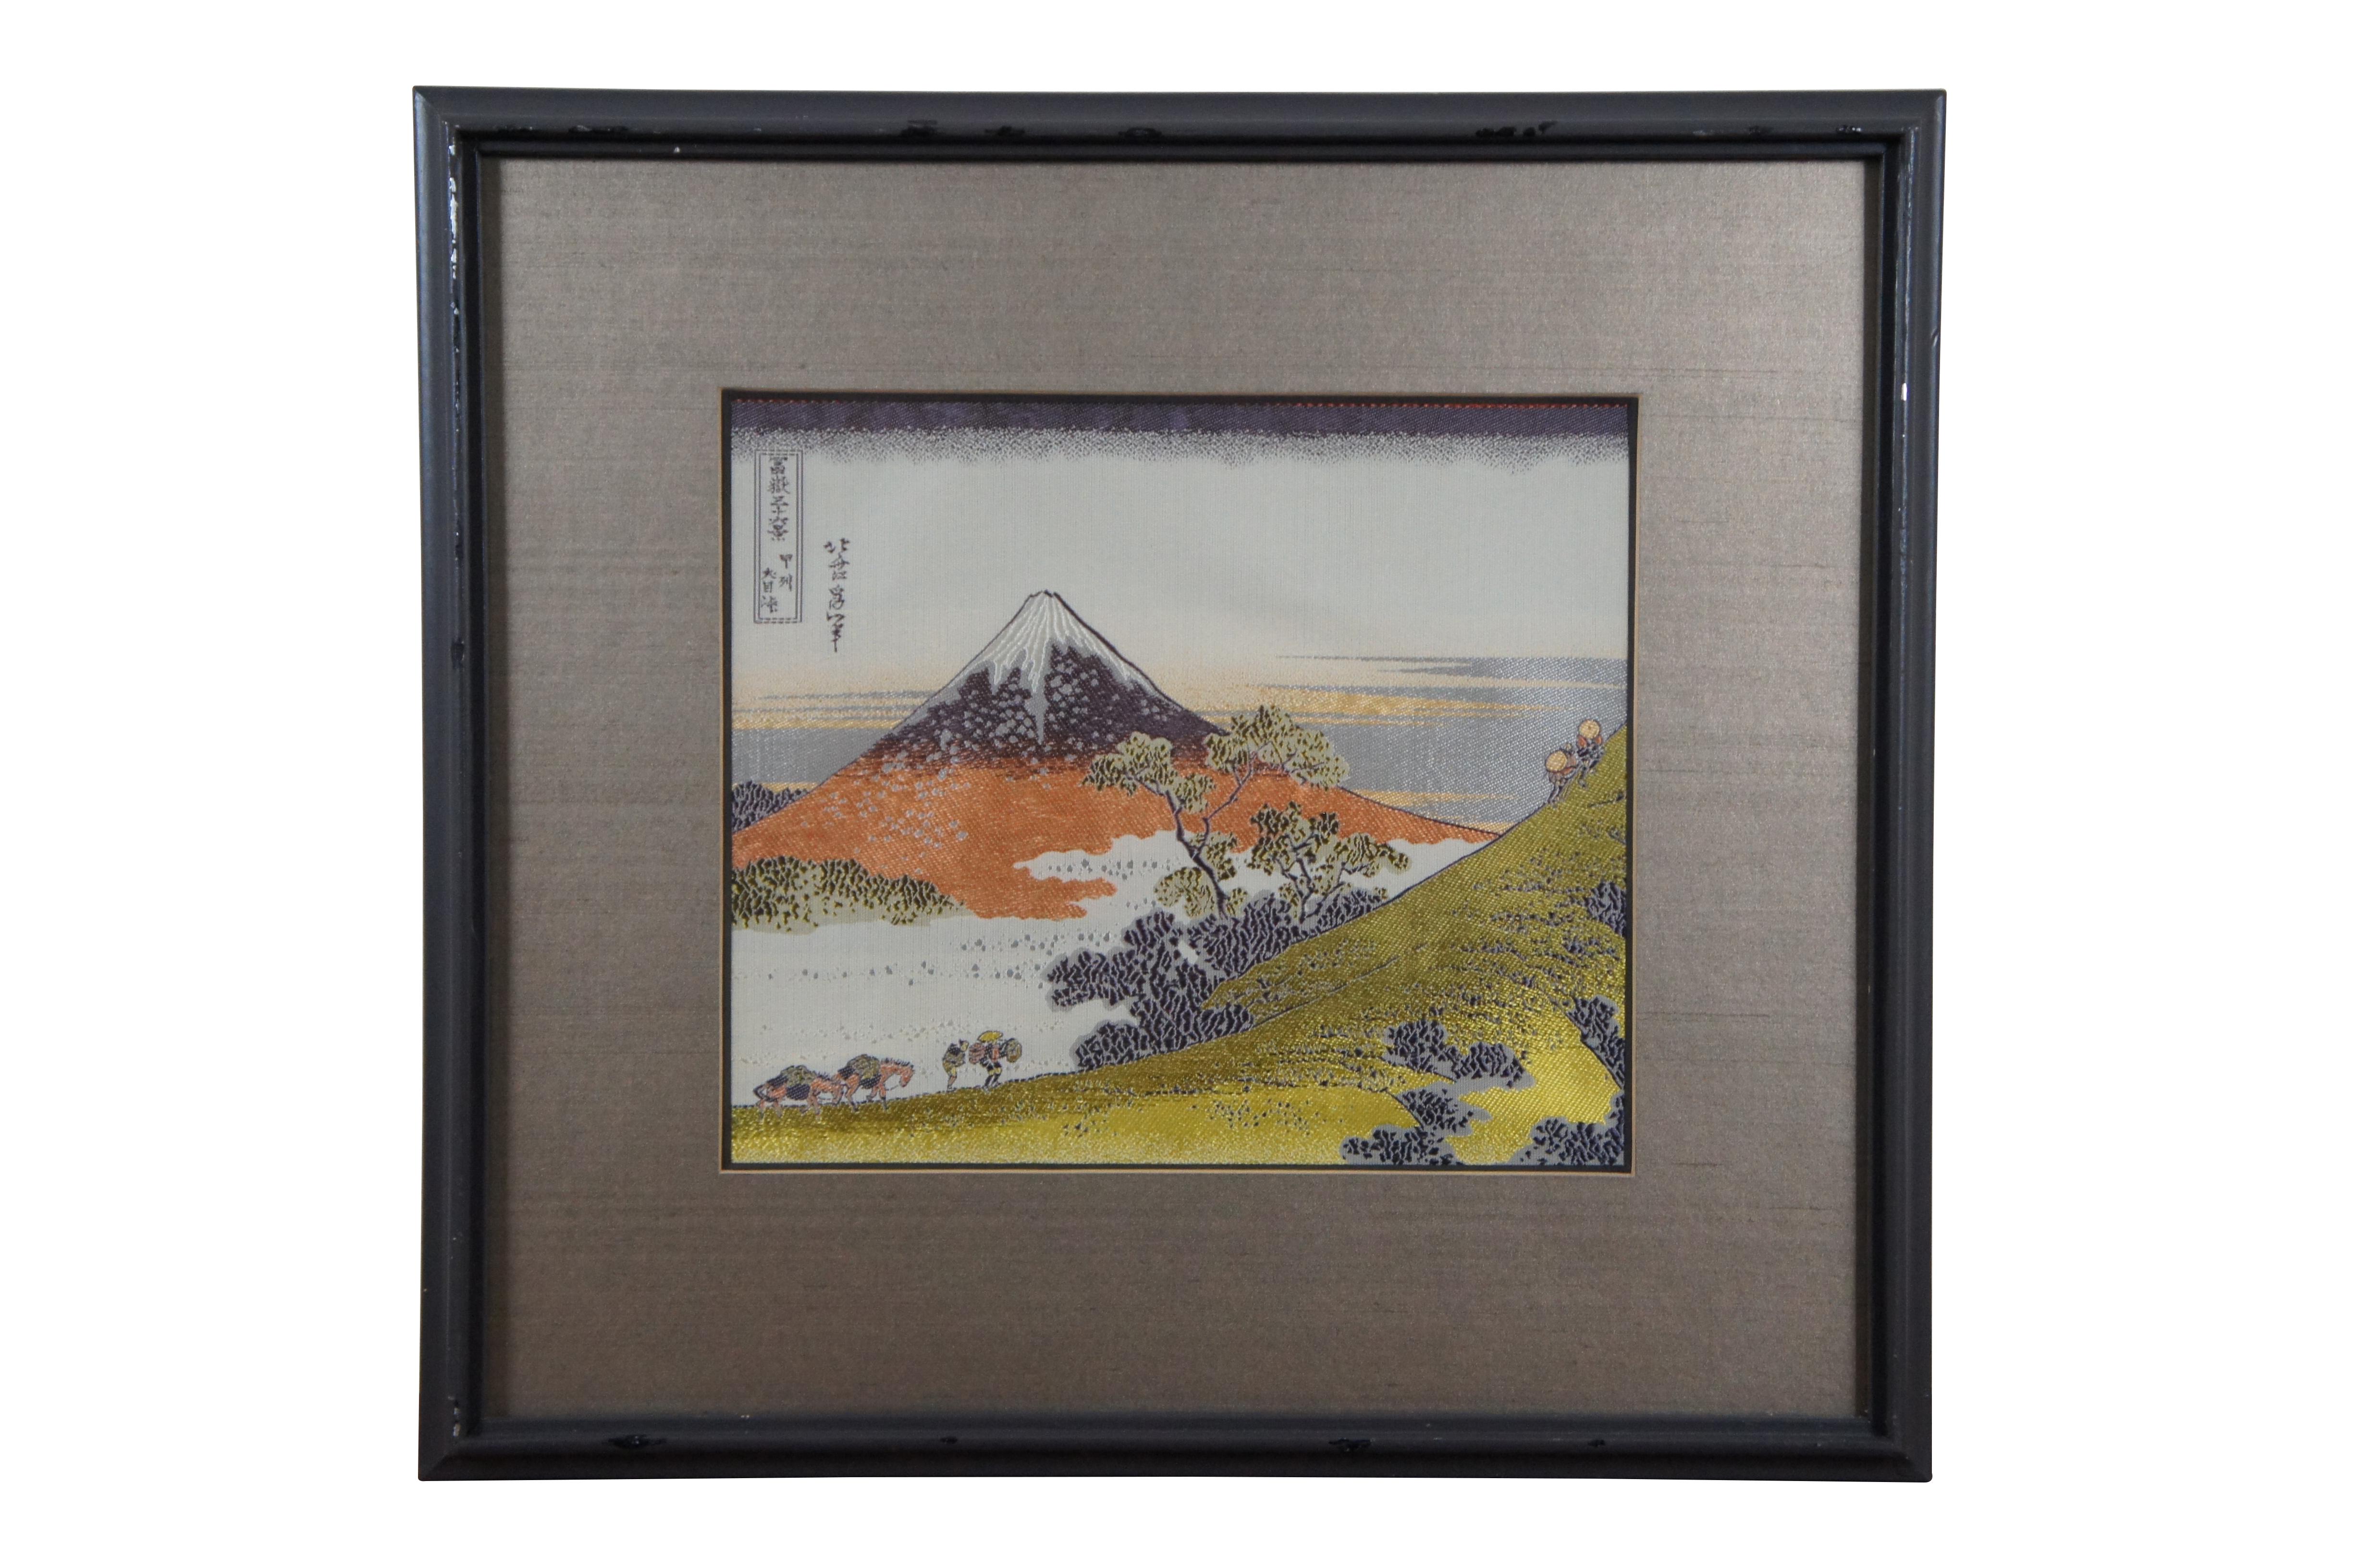 Pair of vintage embroidered silk scenes based on Japanese woodblock prints. One shows a mountain landscape with figures, after a woodblock print of Inume Pass in Kai Province (Kōshū Inume tōge), from the series Thirty-six Views of Mount Fuji (Fugaku